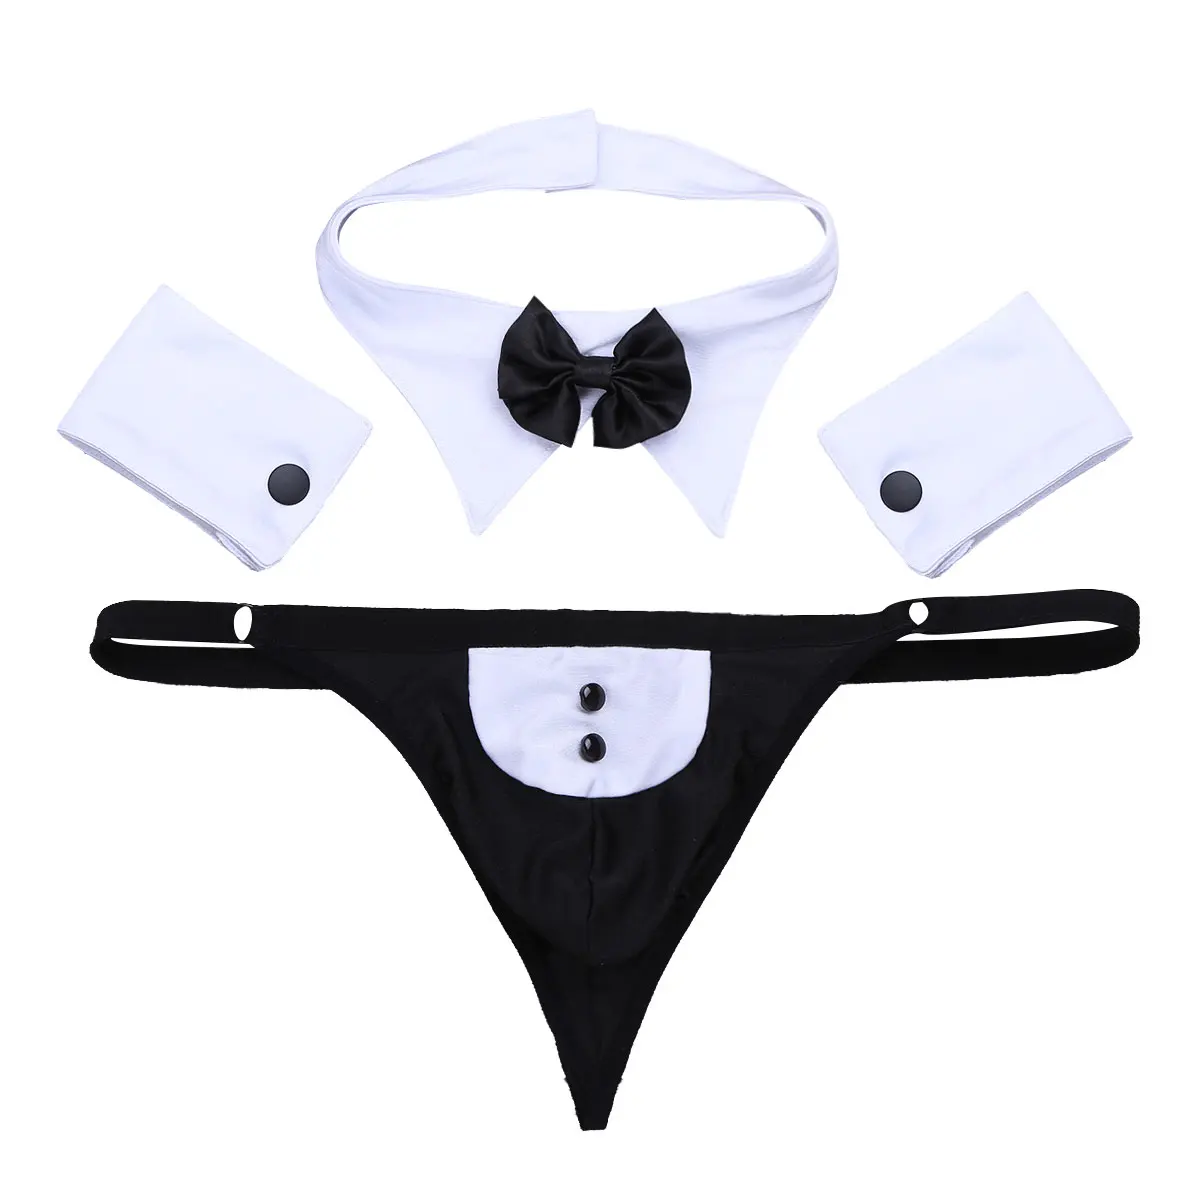 

Mens Waiter Maid Lingerie Exotic Costumes Jockstraps Bulge Pouch Sissy Bowknot Tuxedo Gay Sexy Briefs Underwear with Bow Tie